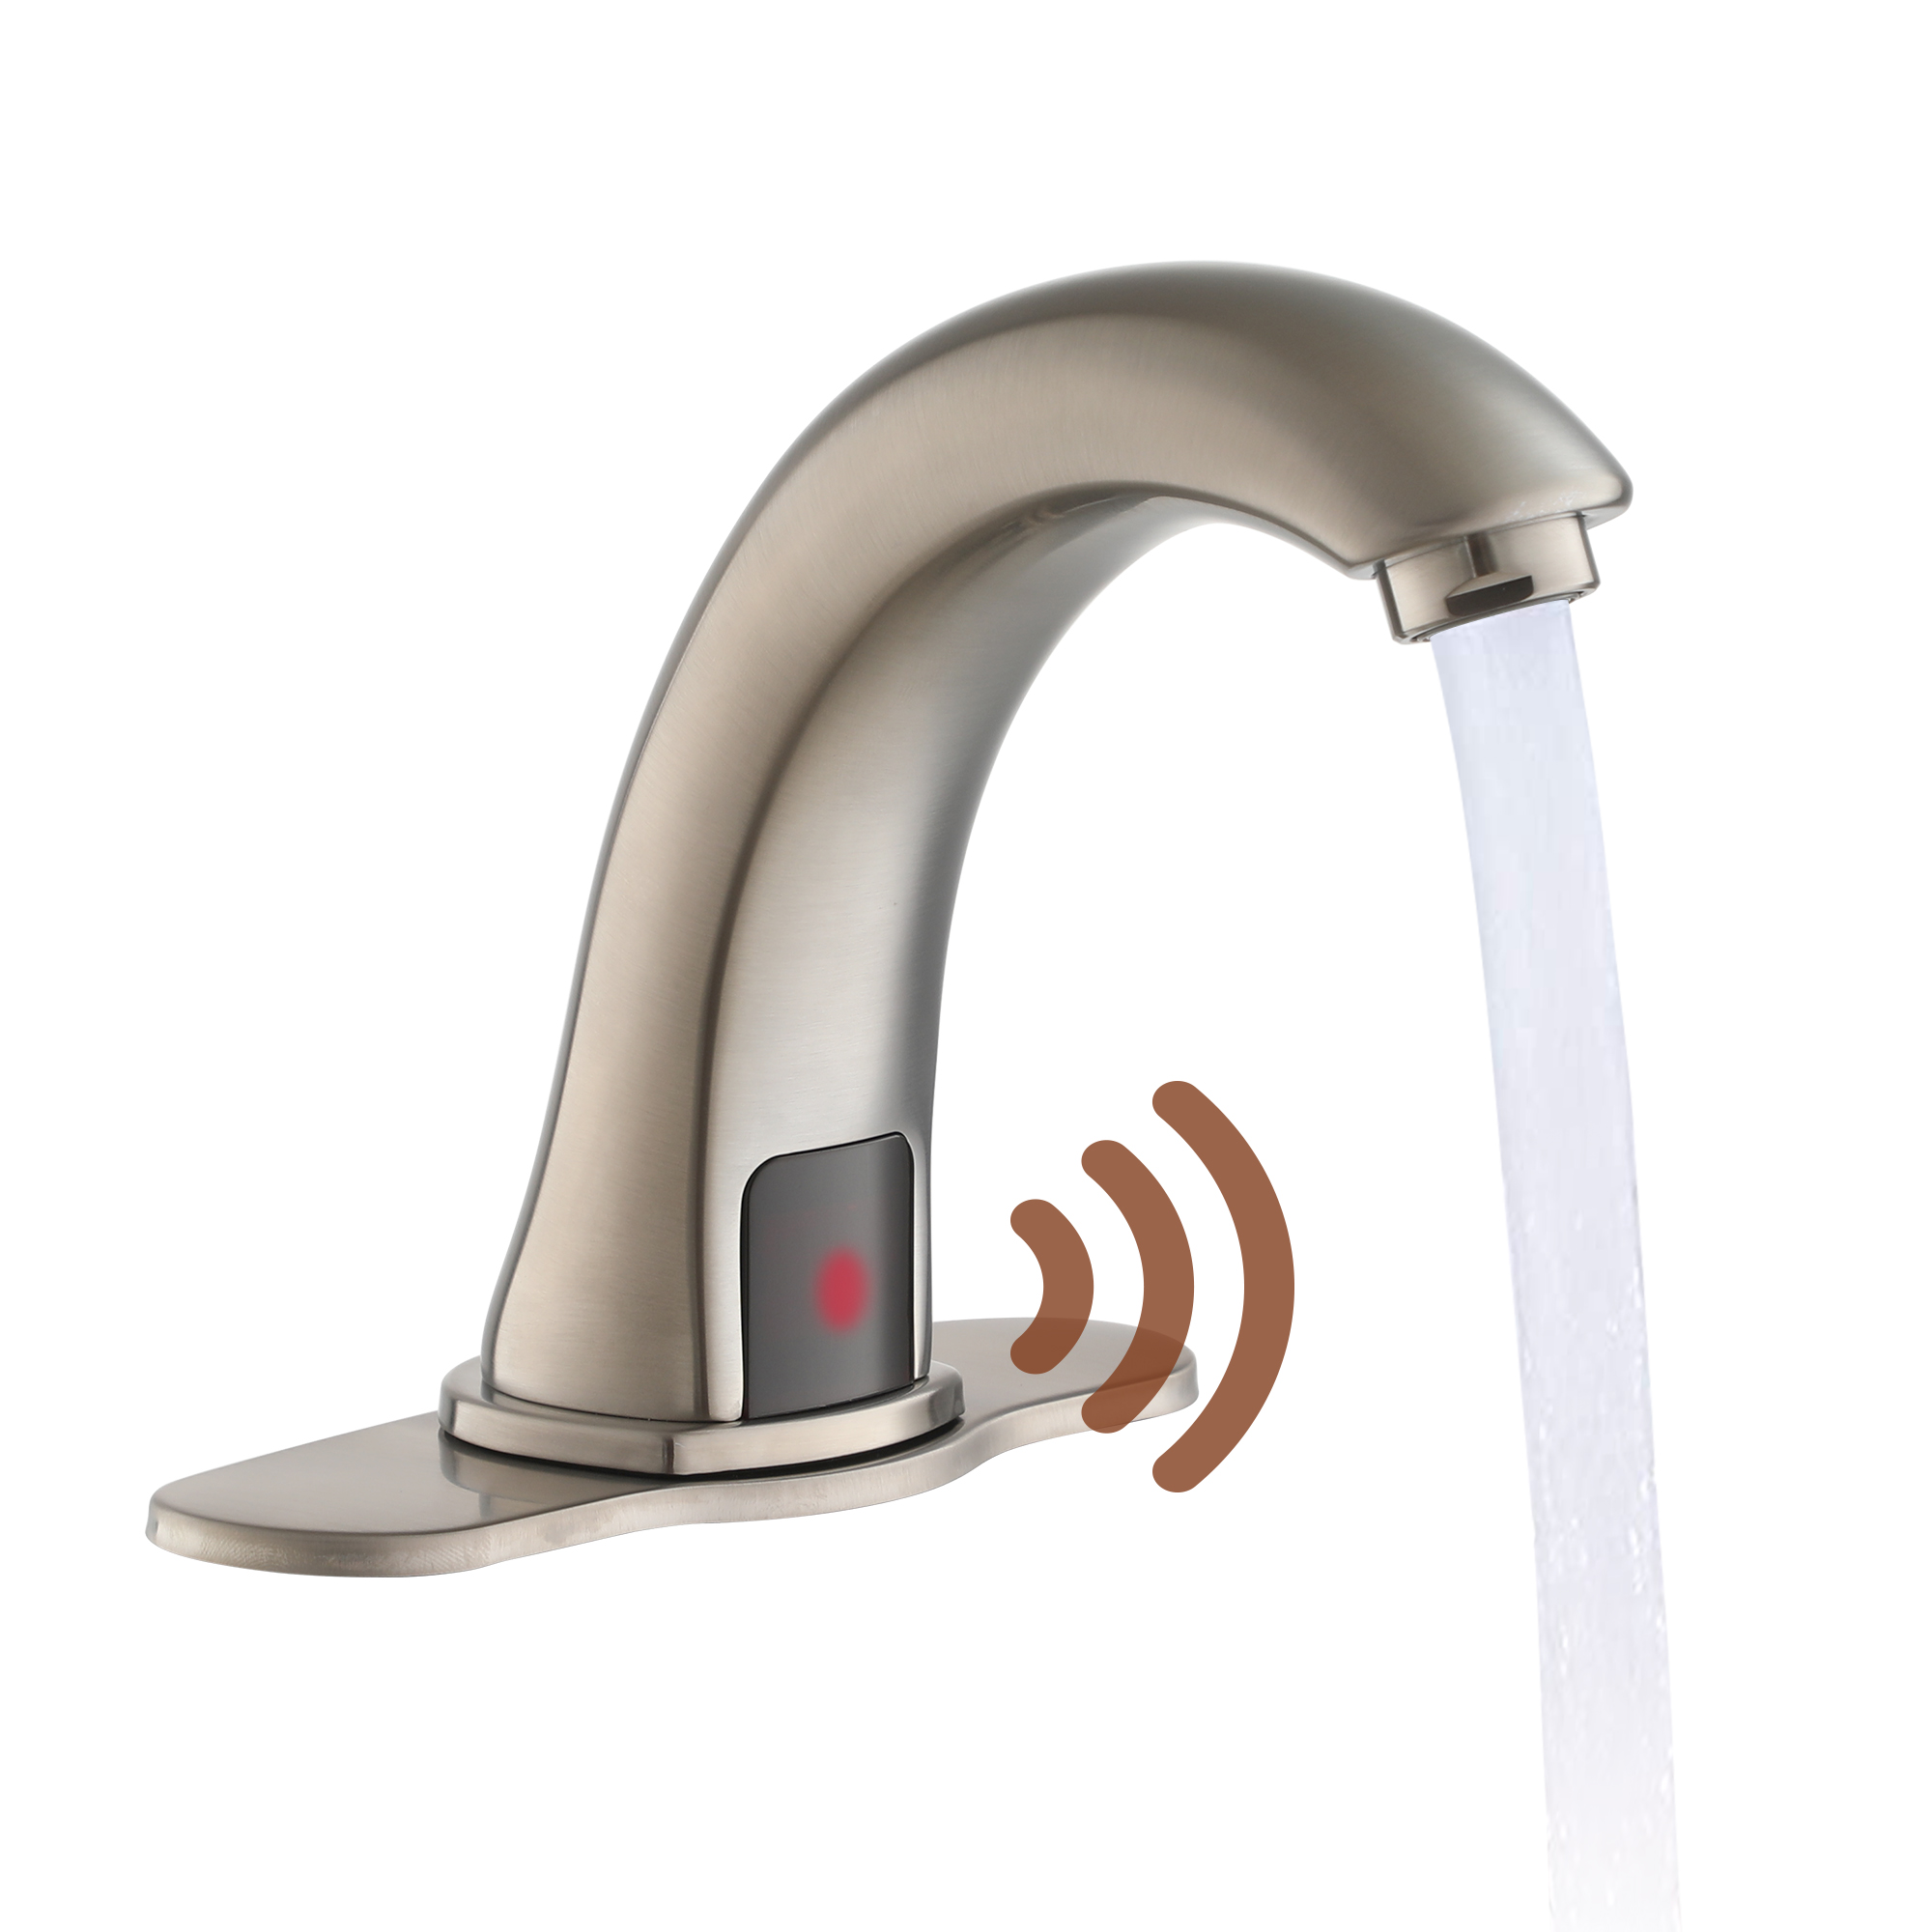 Hands-Free SensorTouchless Single Hole Bathroom Faucet in Chrome with Deck Plate and Valve